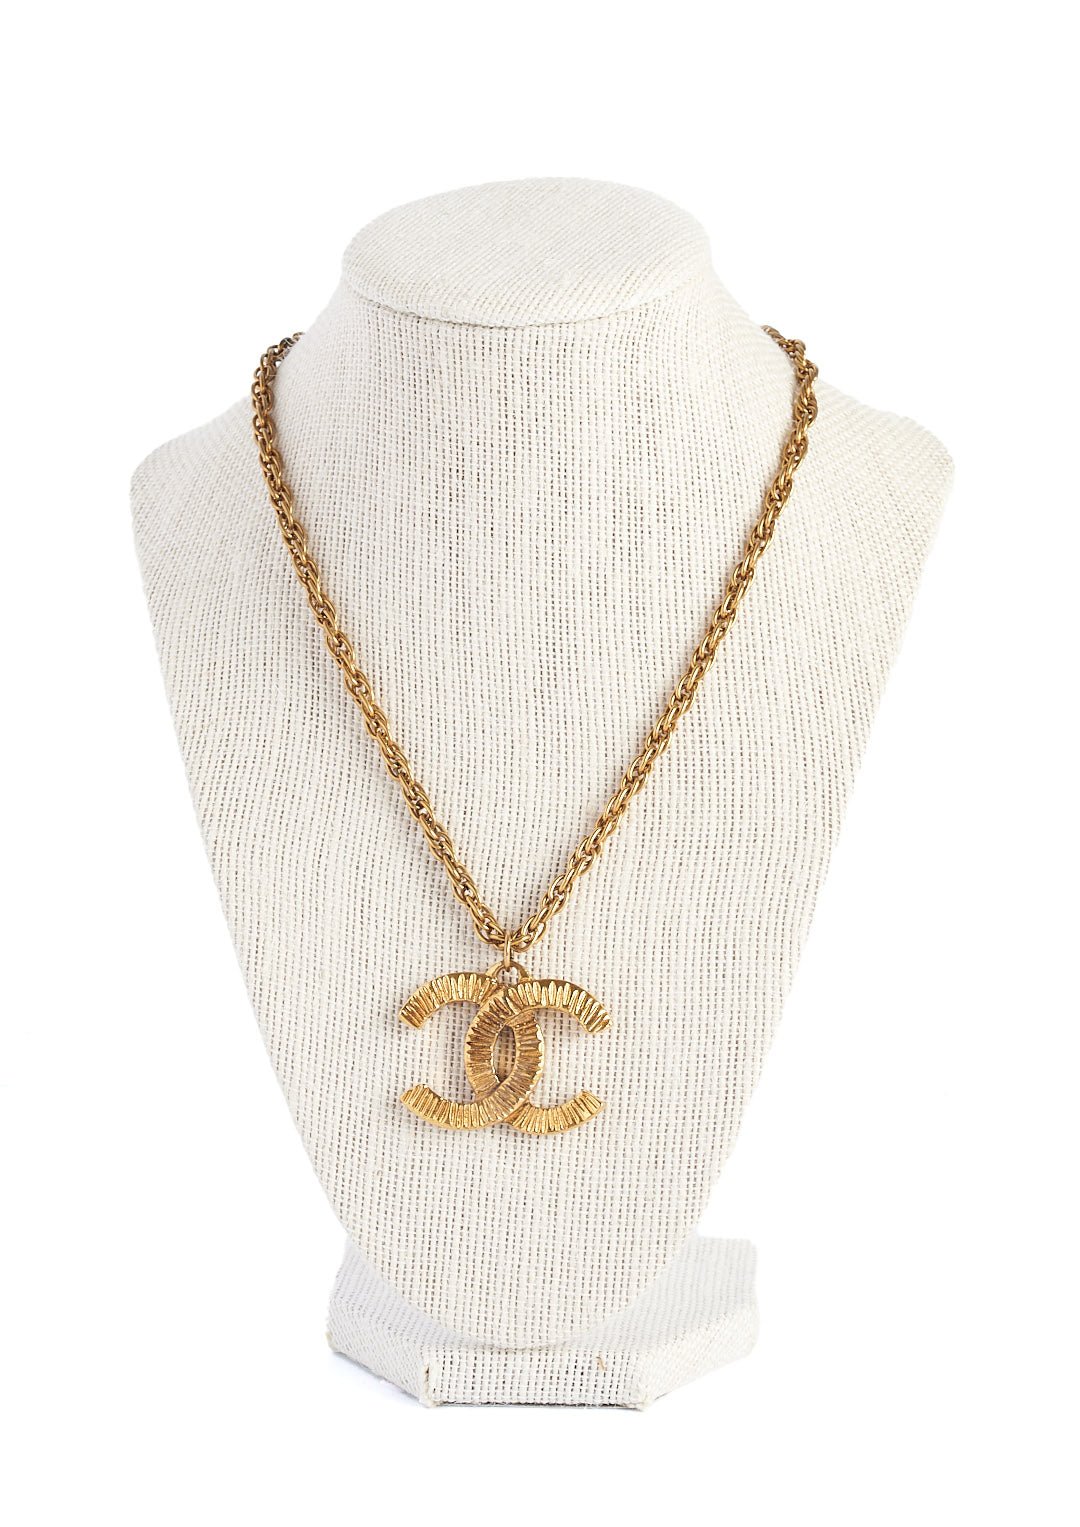 Authentic Chanel CC Crystal + Faux Pearl Pendant | Reworked Gold 17-19  Necklace